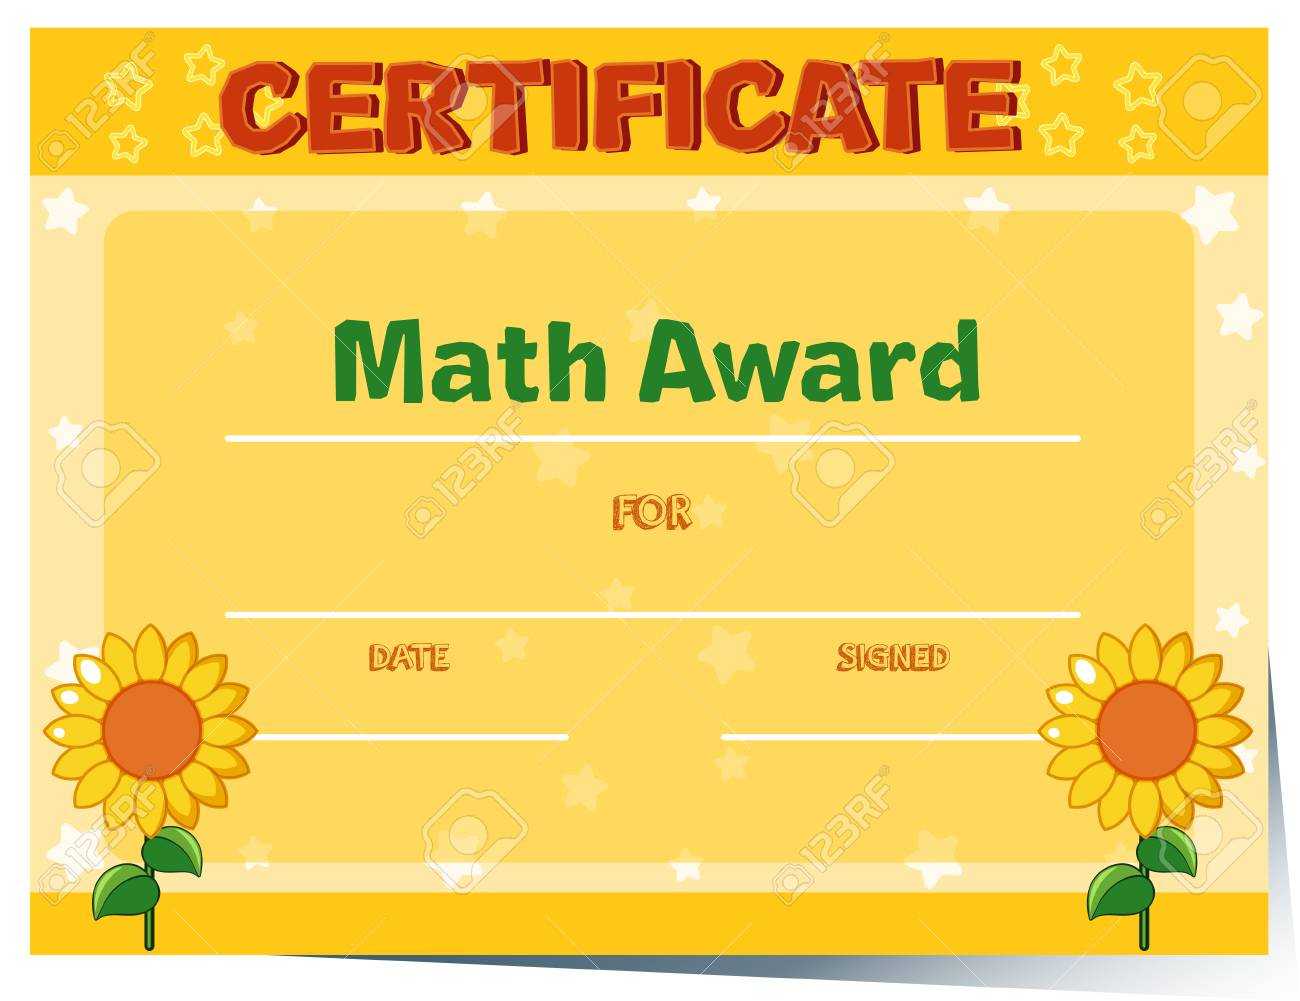 Certificate Template With Sunflowers In Background Illustration With Regard To Math Certificate Template